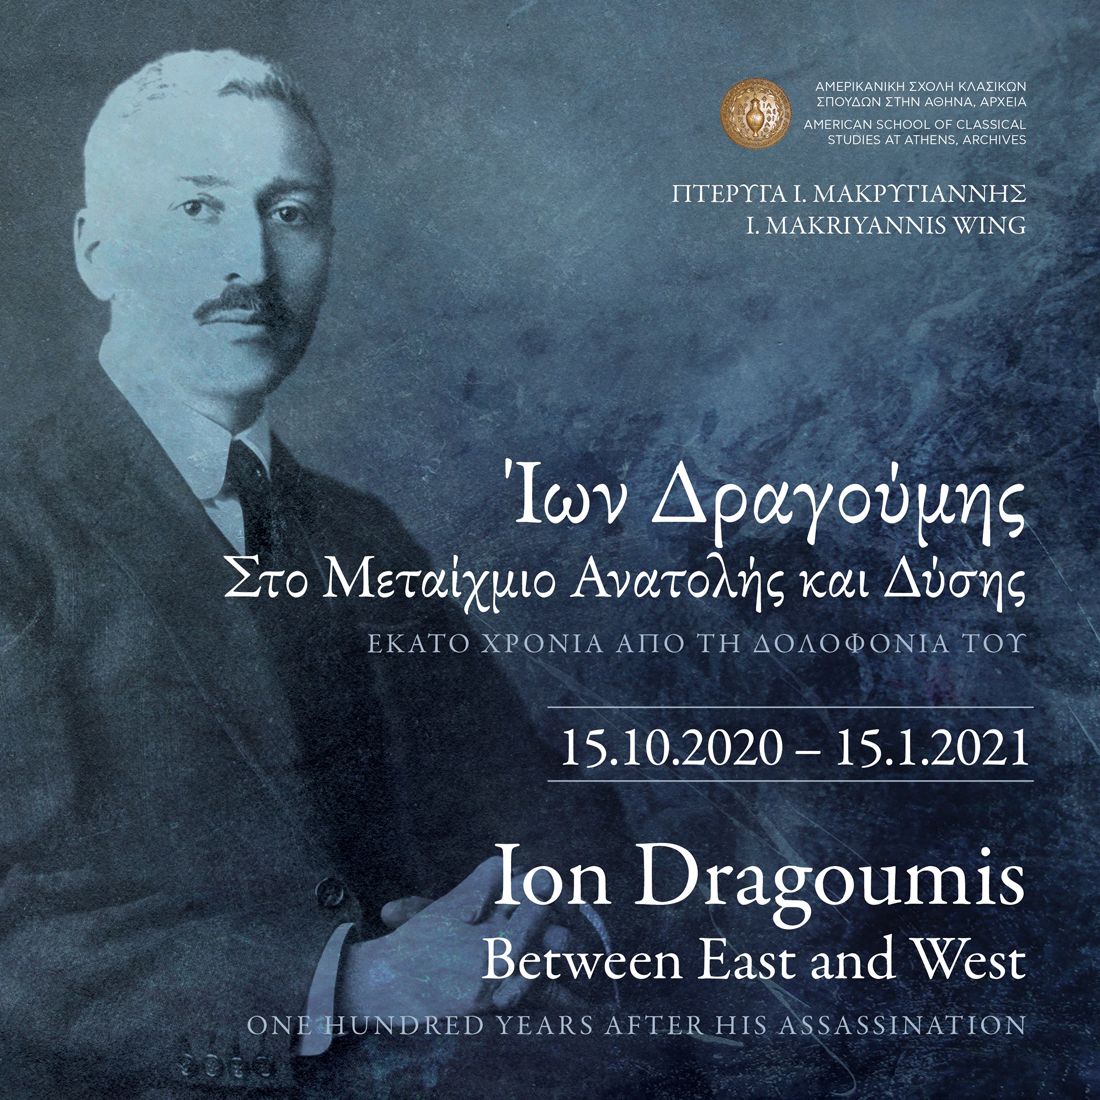 Ion Dragoumis: Between East and West. One Hundred Years After His Assassination